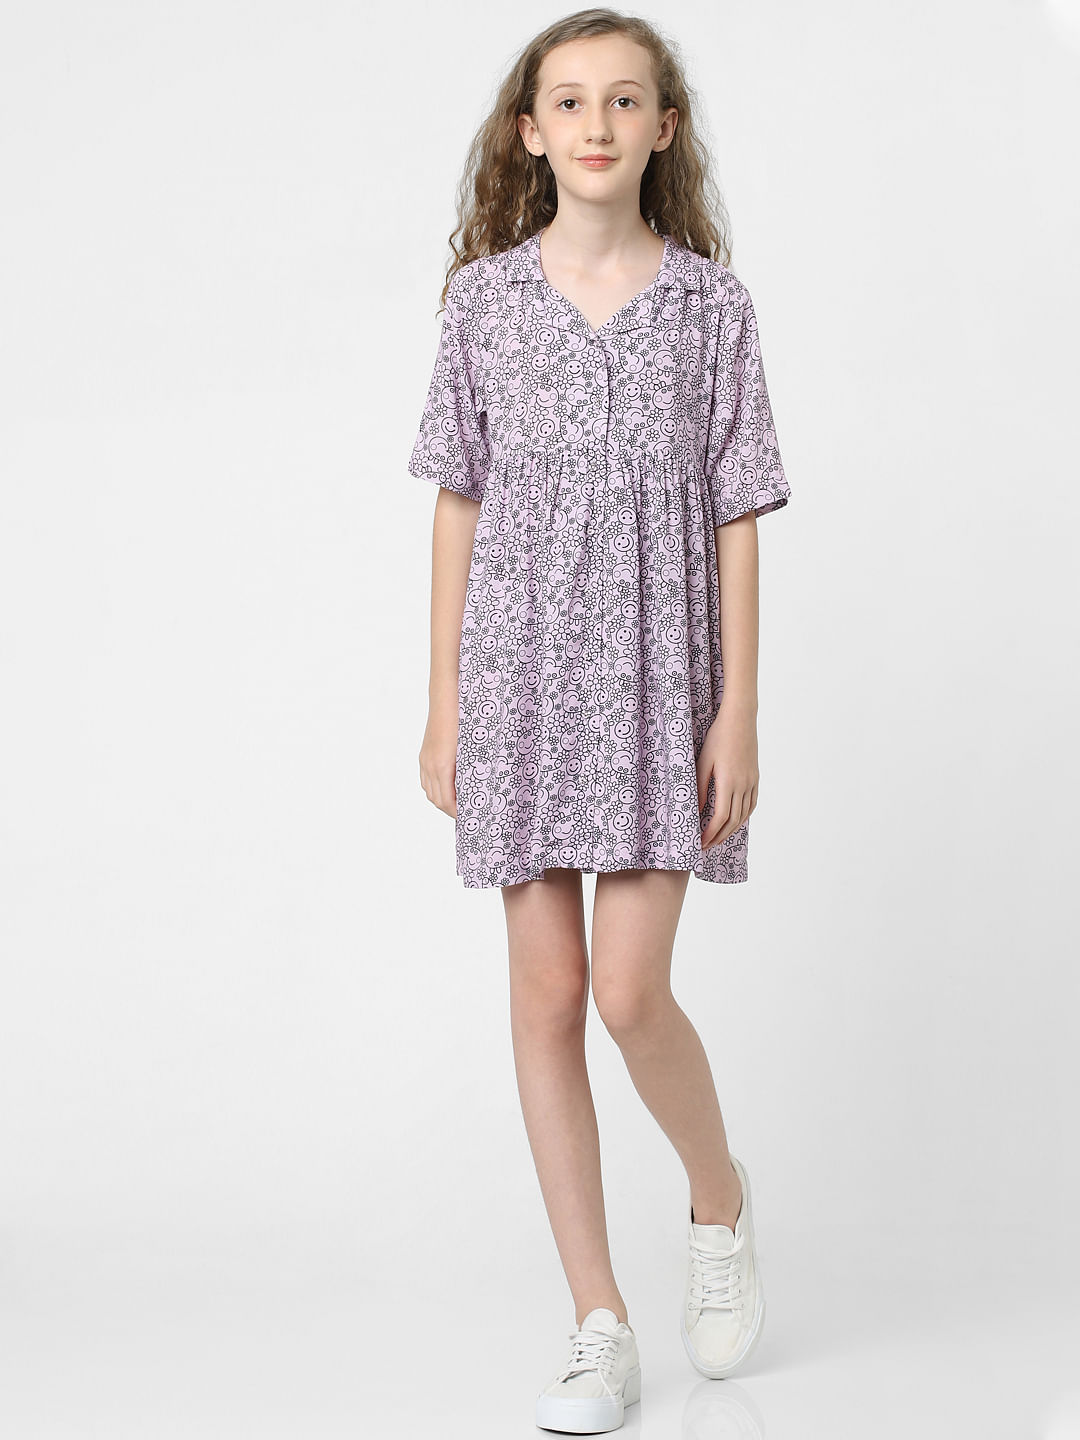 Trotters Kids' Peppa Pig Meadow Liberty Print Smock Party Dress, Pink/White  at John Lewis & Partners